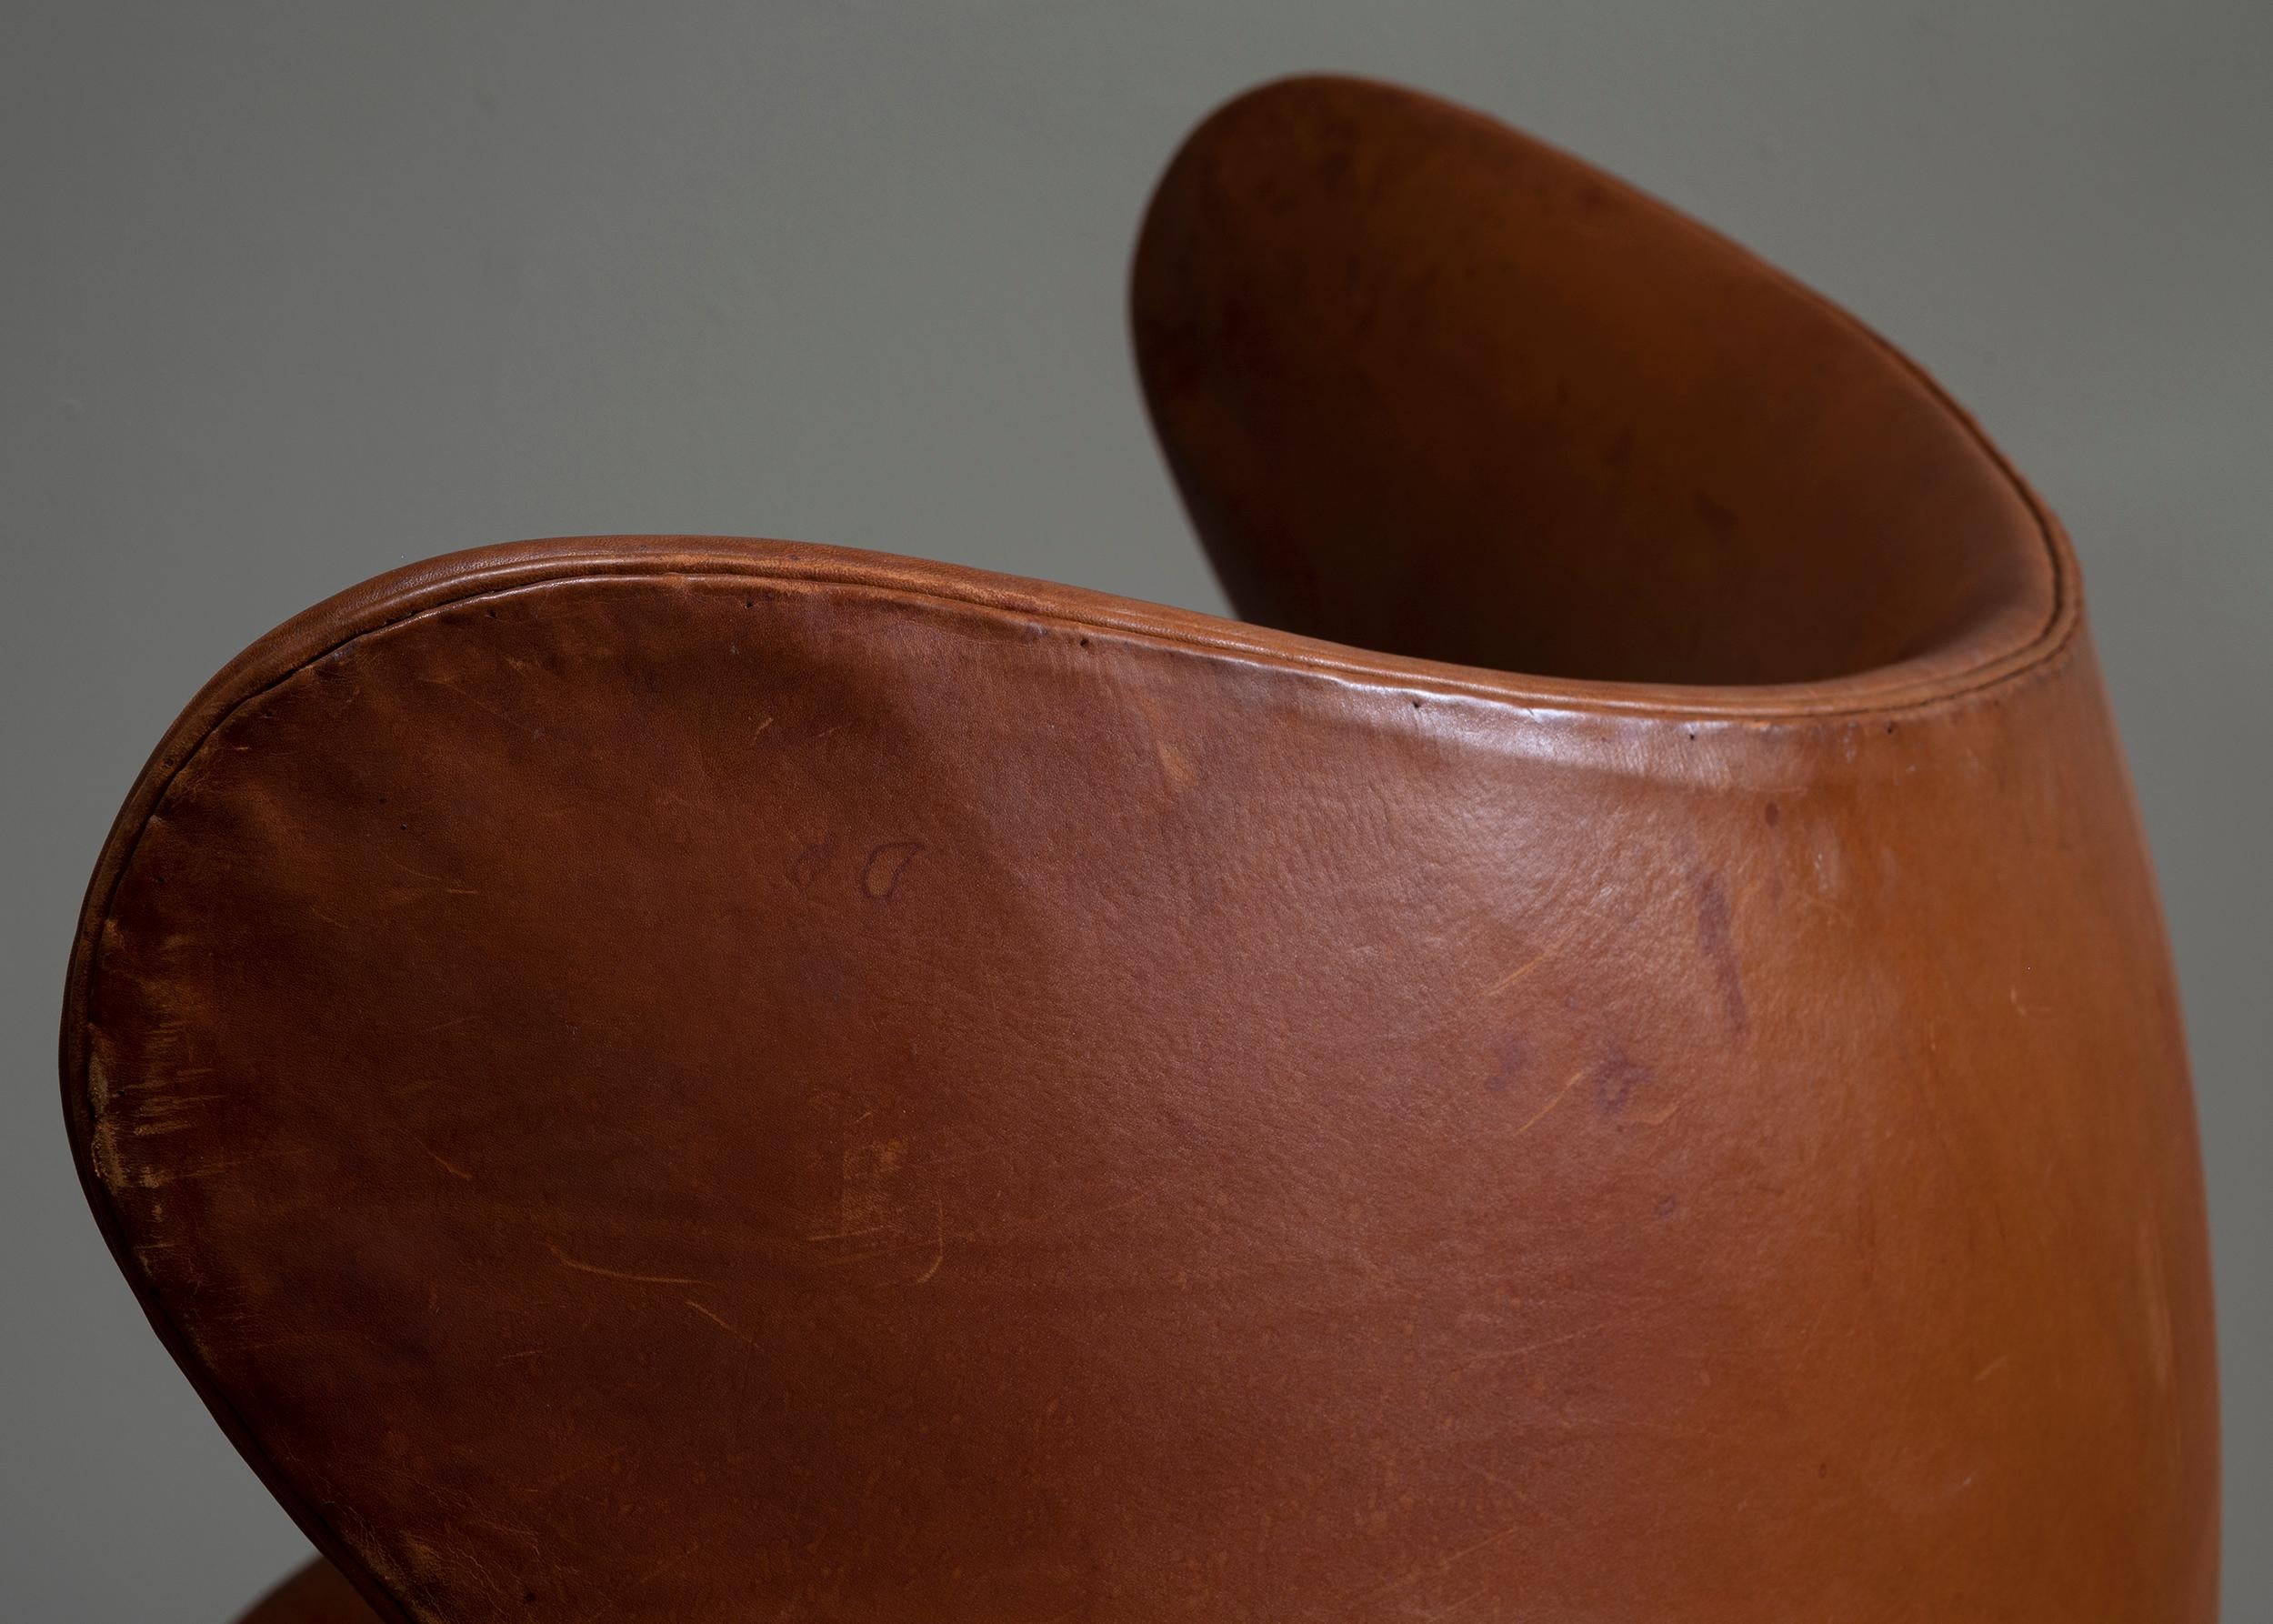 Hand-Crafted Arne Jacobson 'Egg' Chair for Fritz Hansen, 1958 For Sale